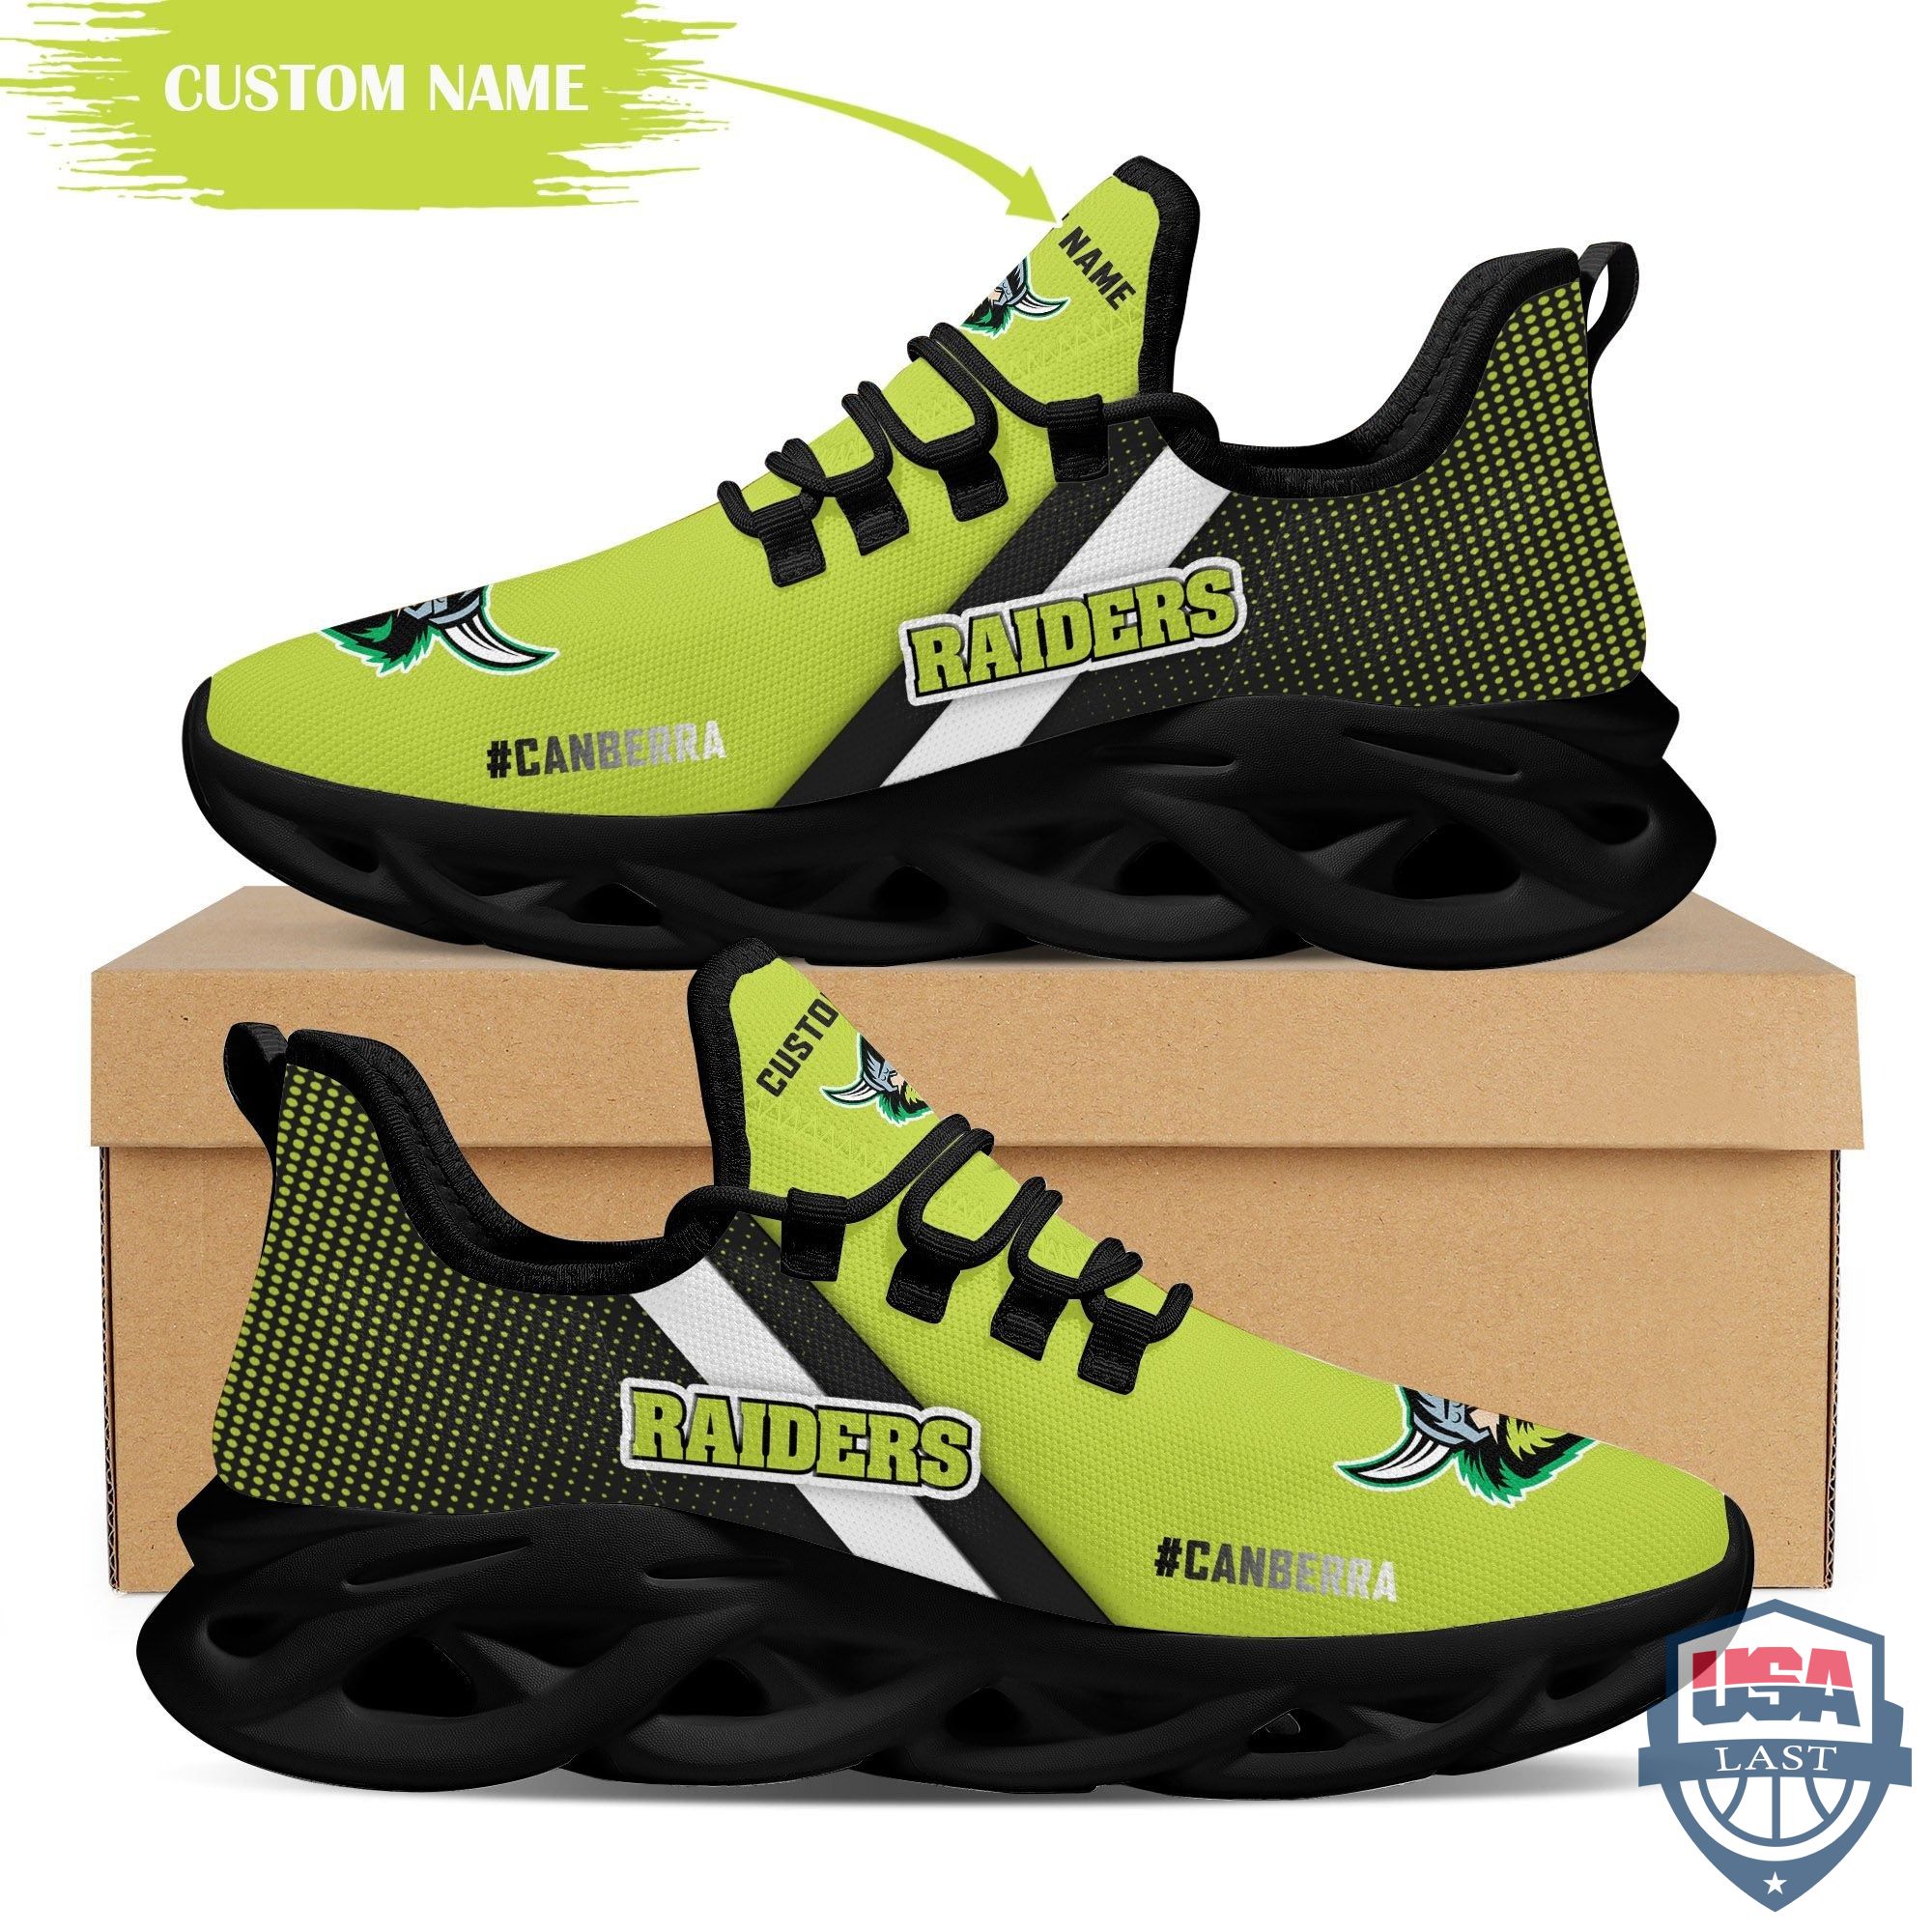 b0itkECO-T140122-169xxxPersonalized-Canberra-Raiders-Max-Soul-Shoes.jpg